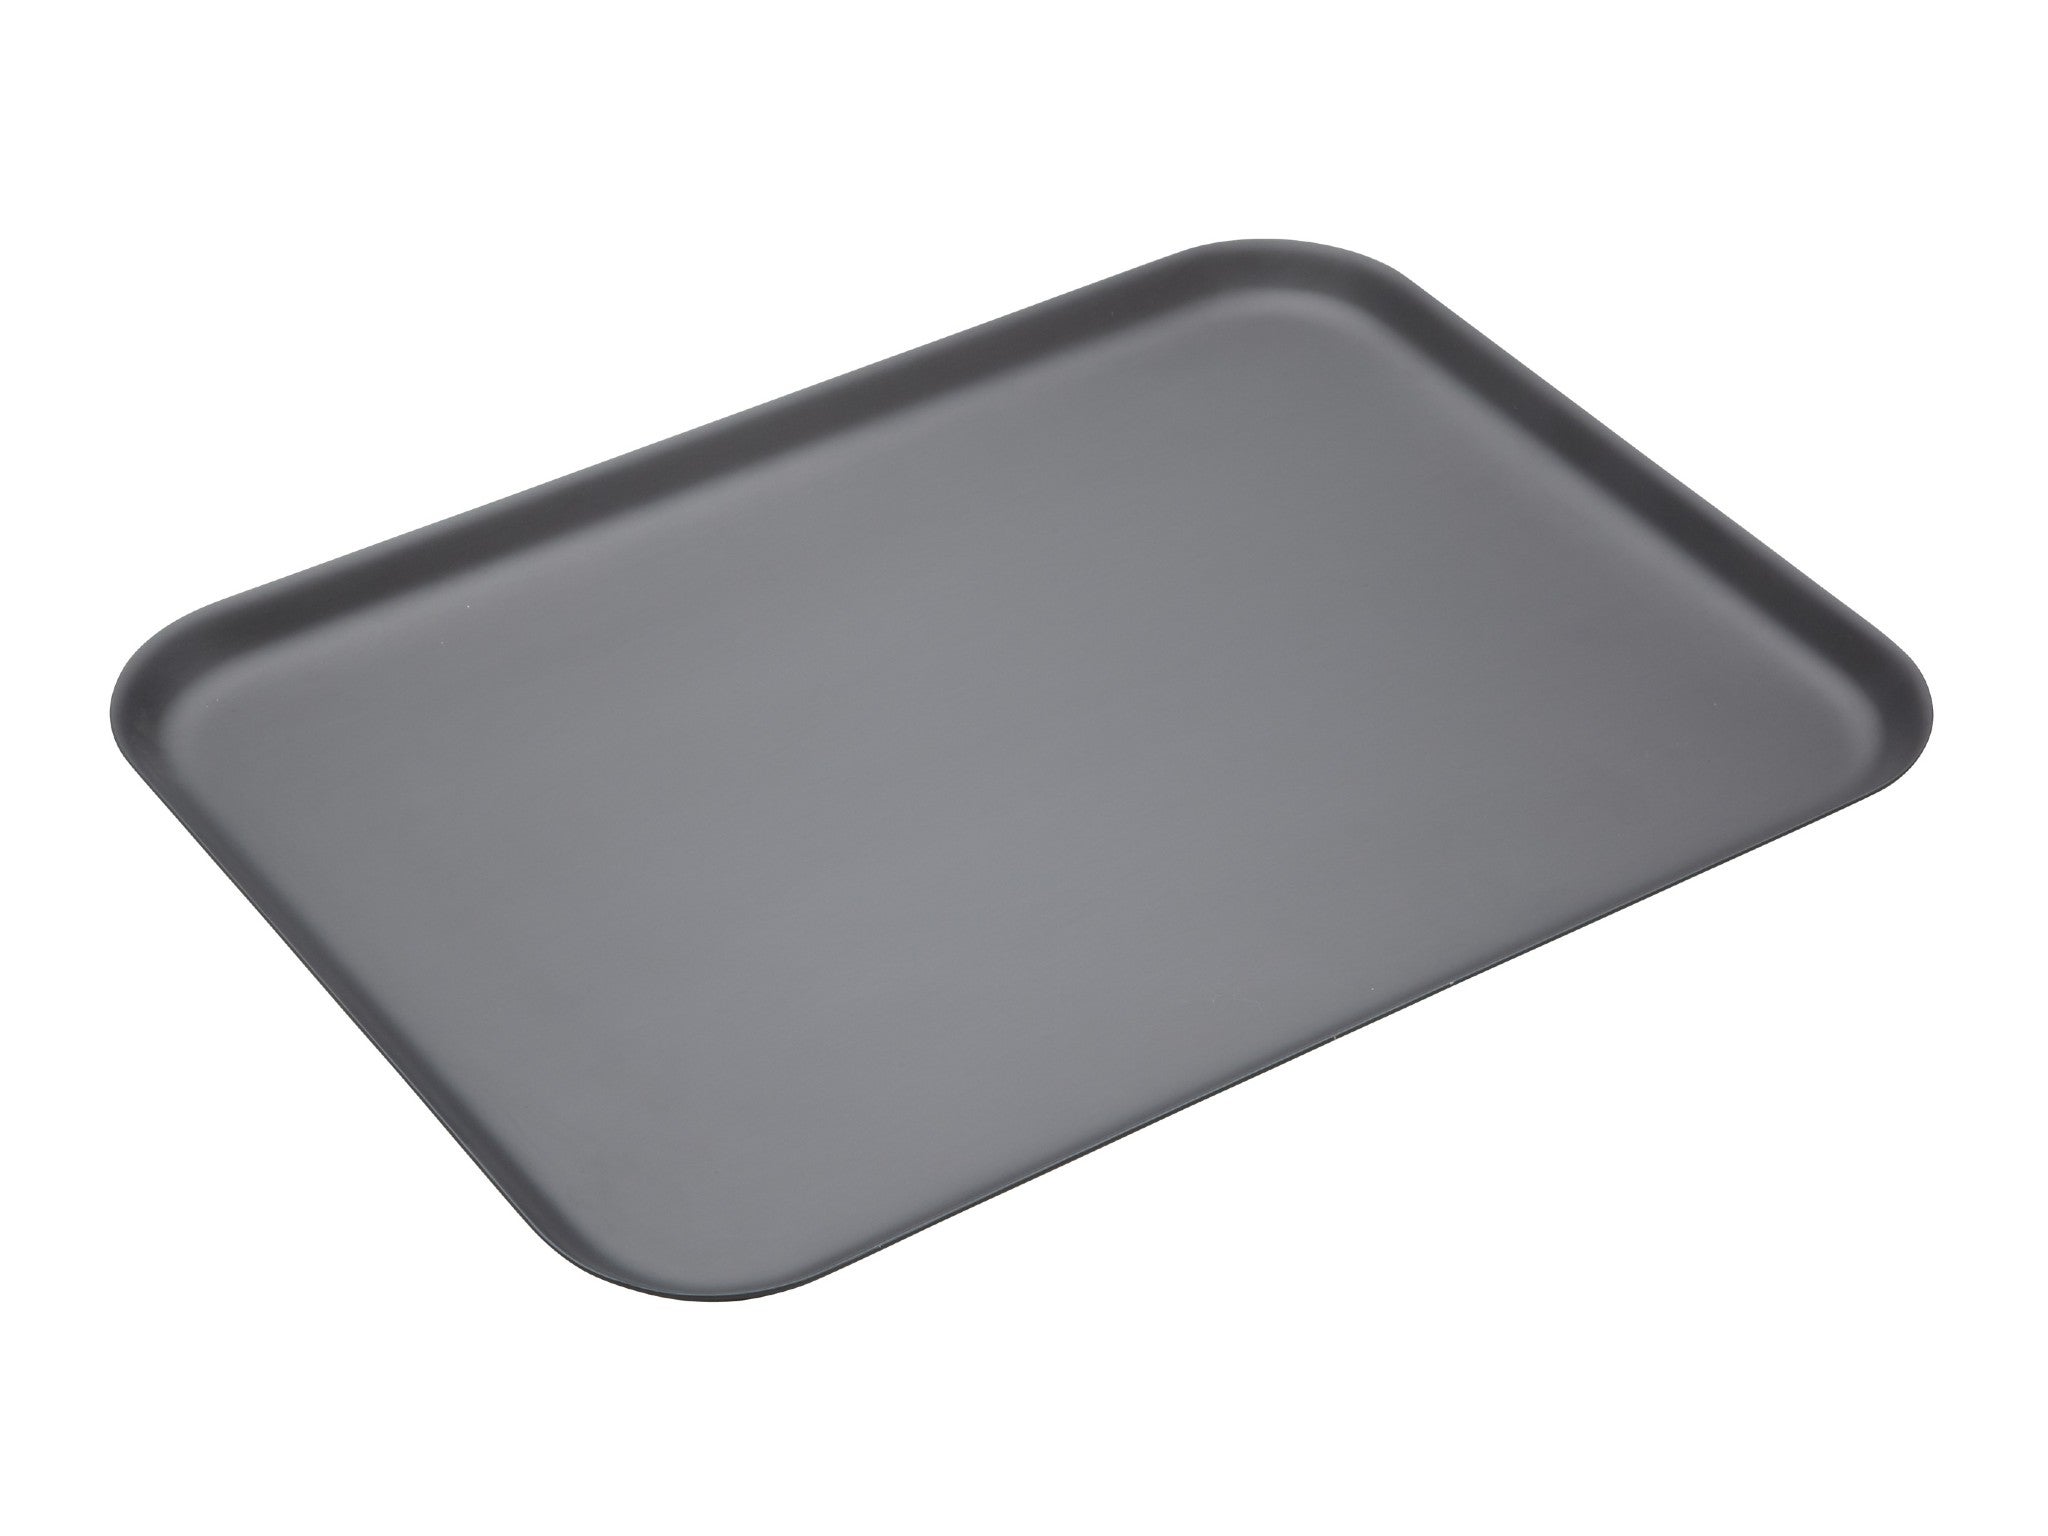 large Non Stick Oven Roasting Cookie Pan Baking Tray Bakeware Shallow tray 